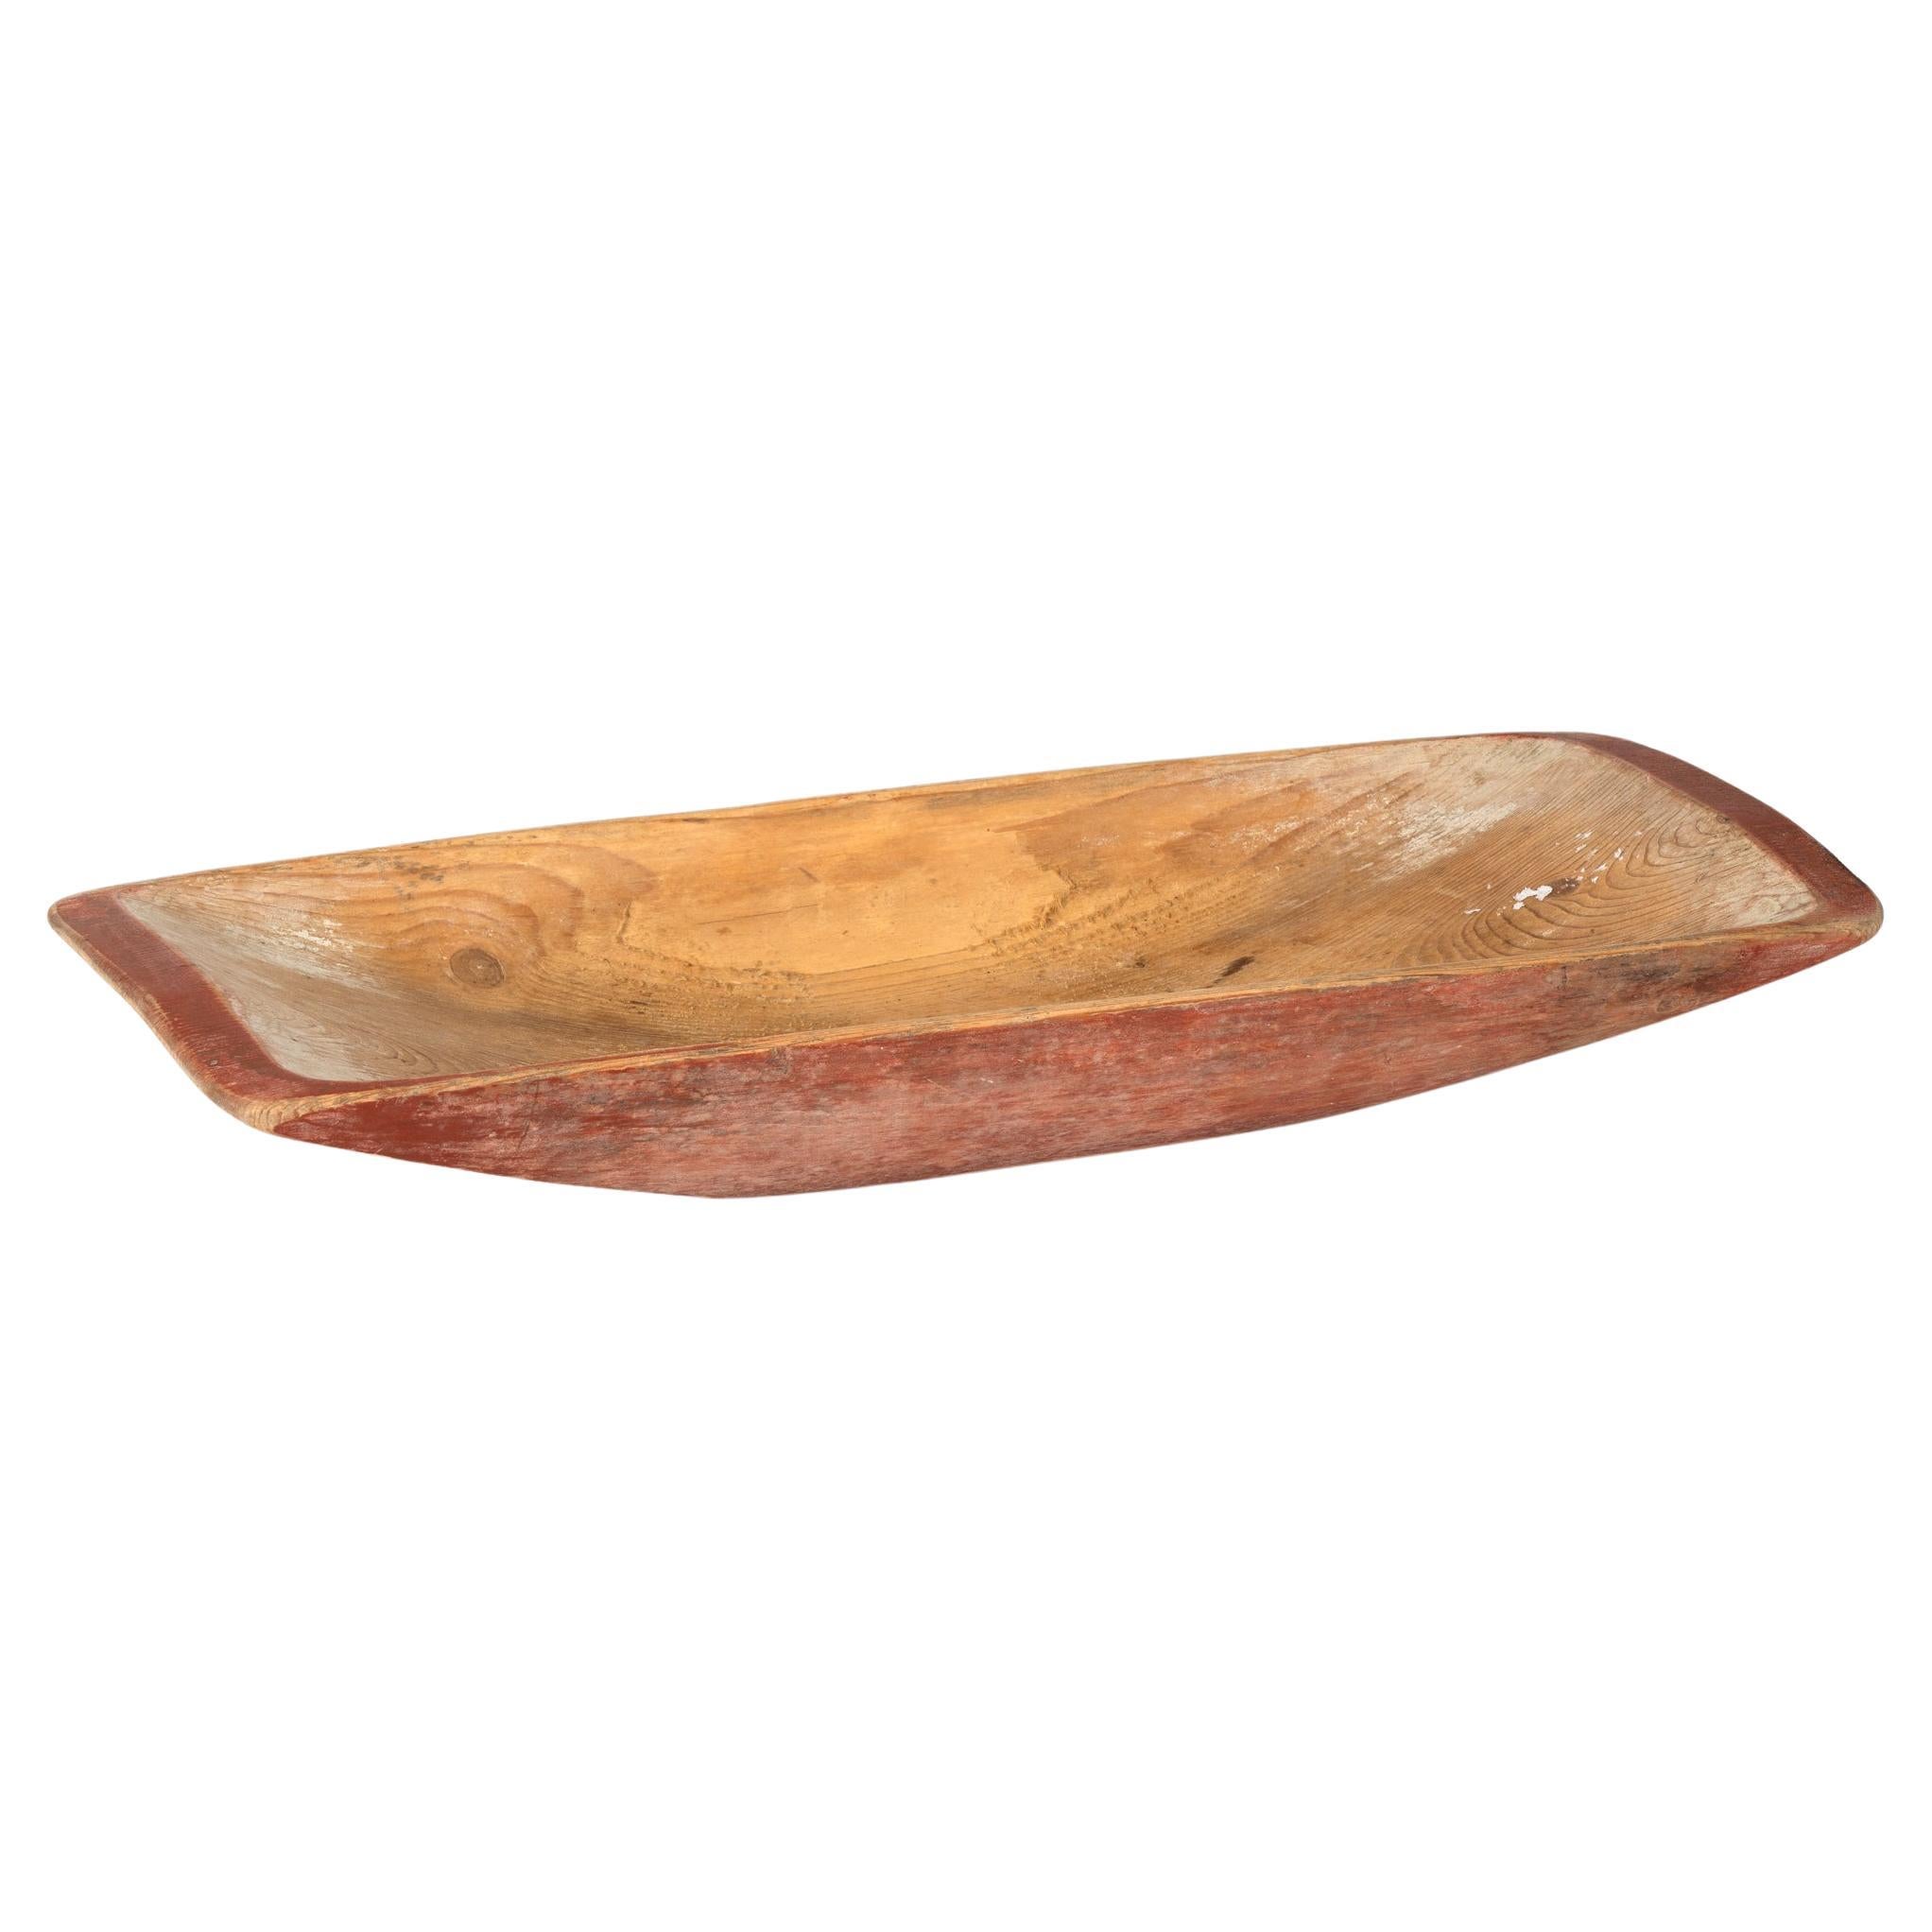 Original Red Painted Carved Pine Wooden Bowl, Sweden circa 1880 For Sale